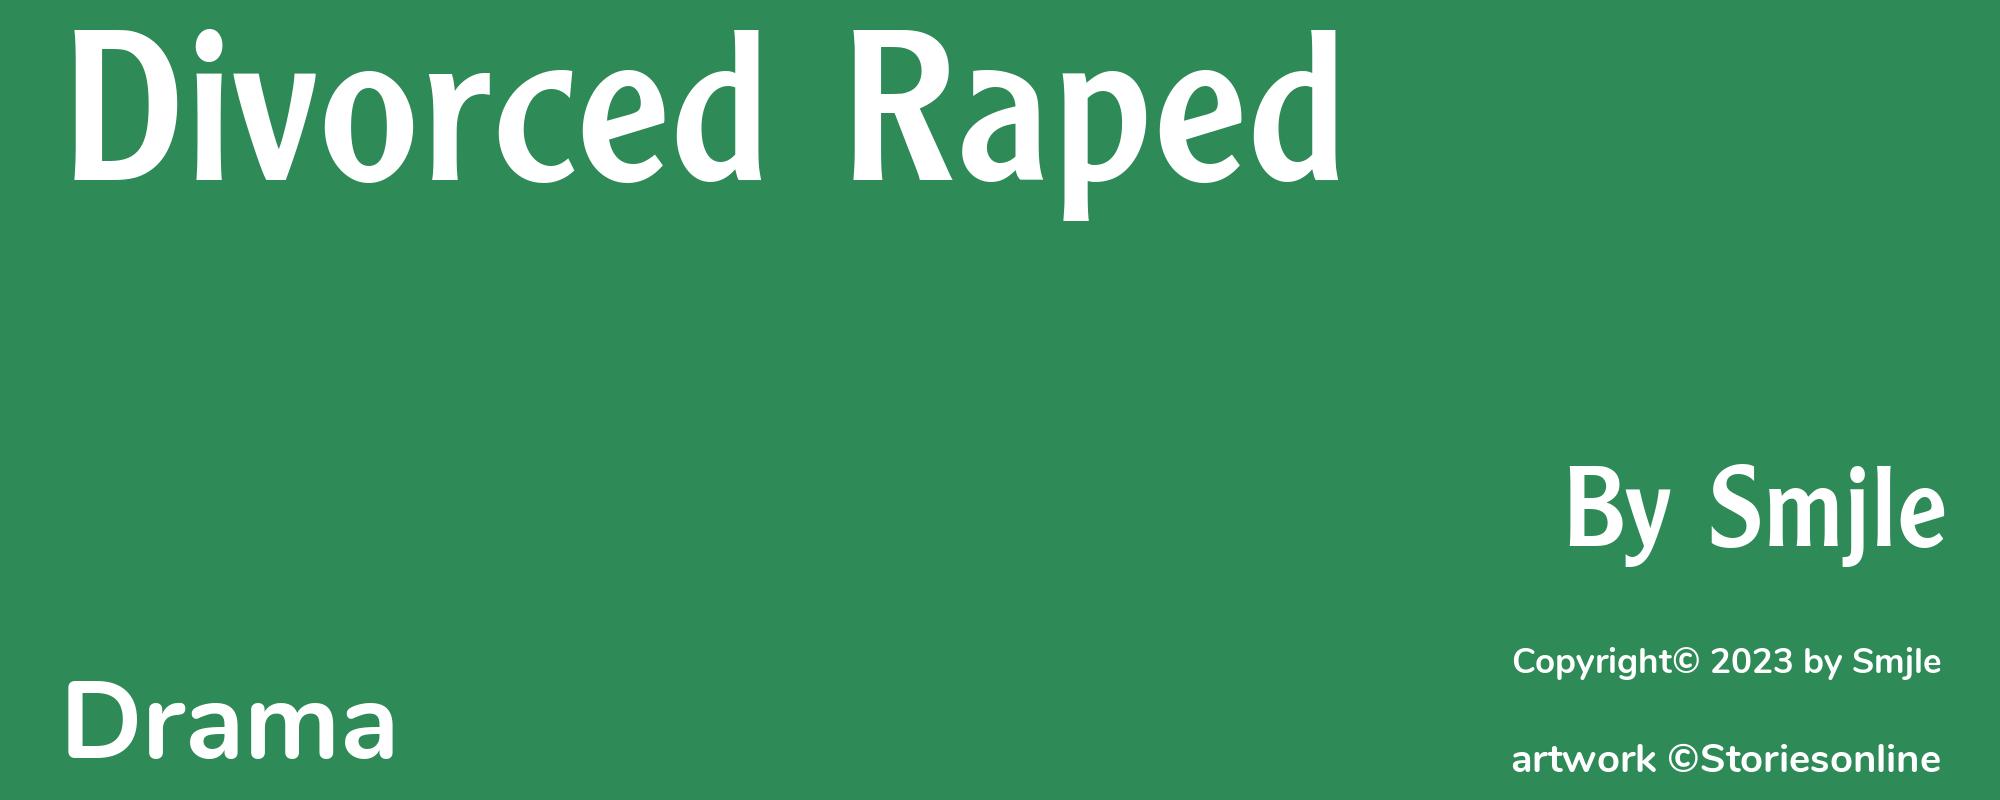 Divorced Raped - Cover